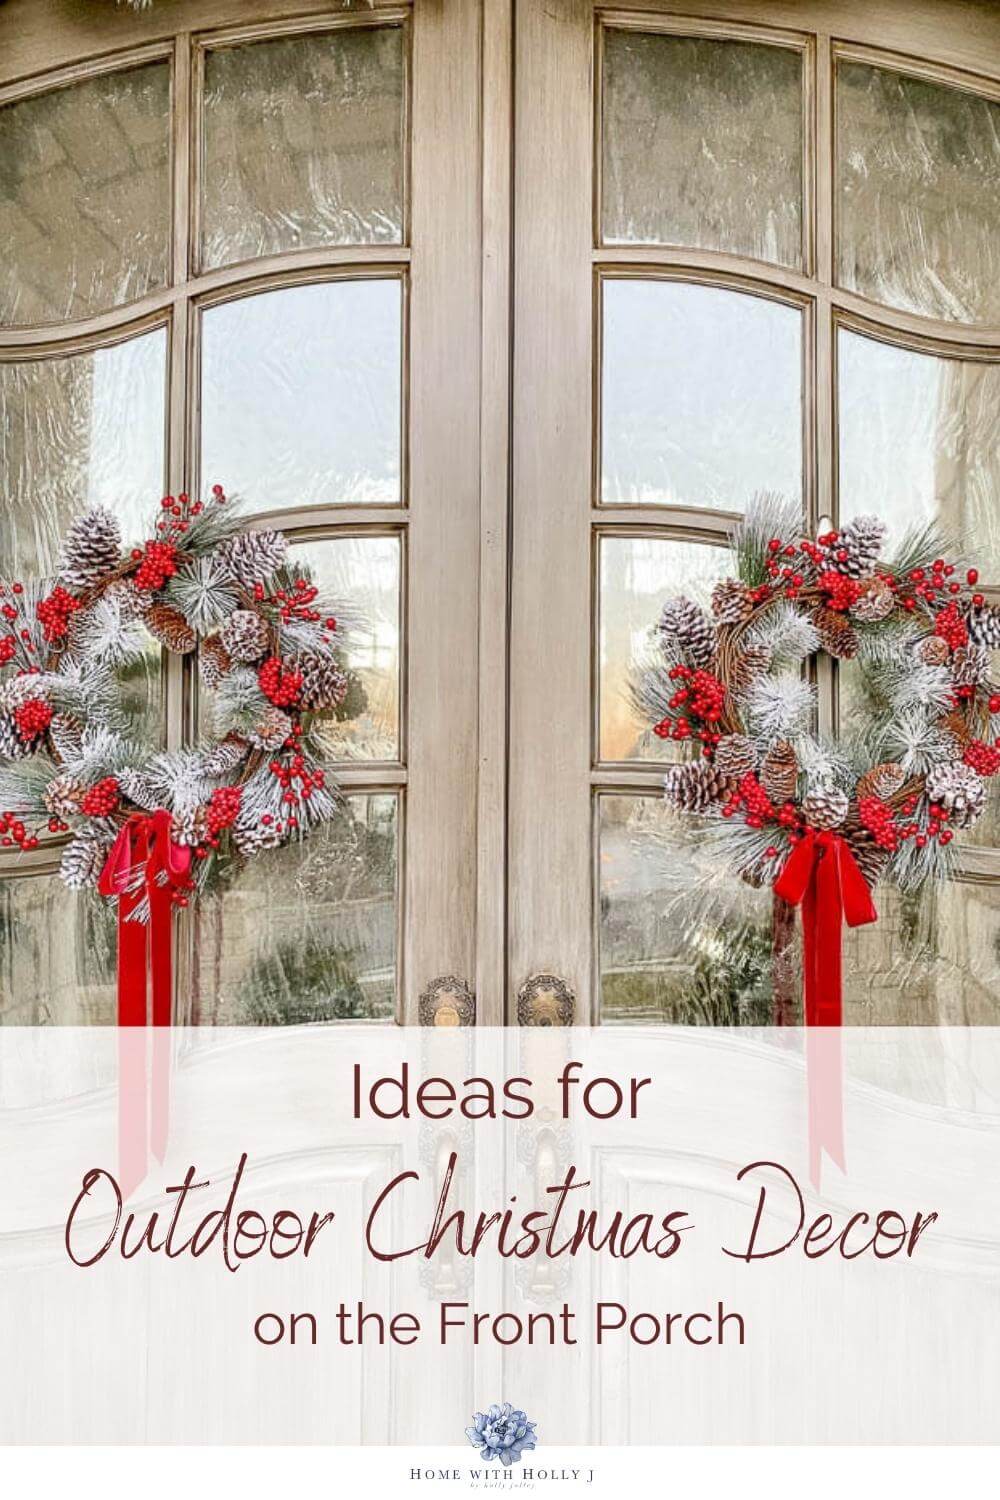 Create an inviting front porch with these outdoor Christmas decorating ideas that are sure to add elegance to your home.